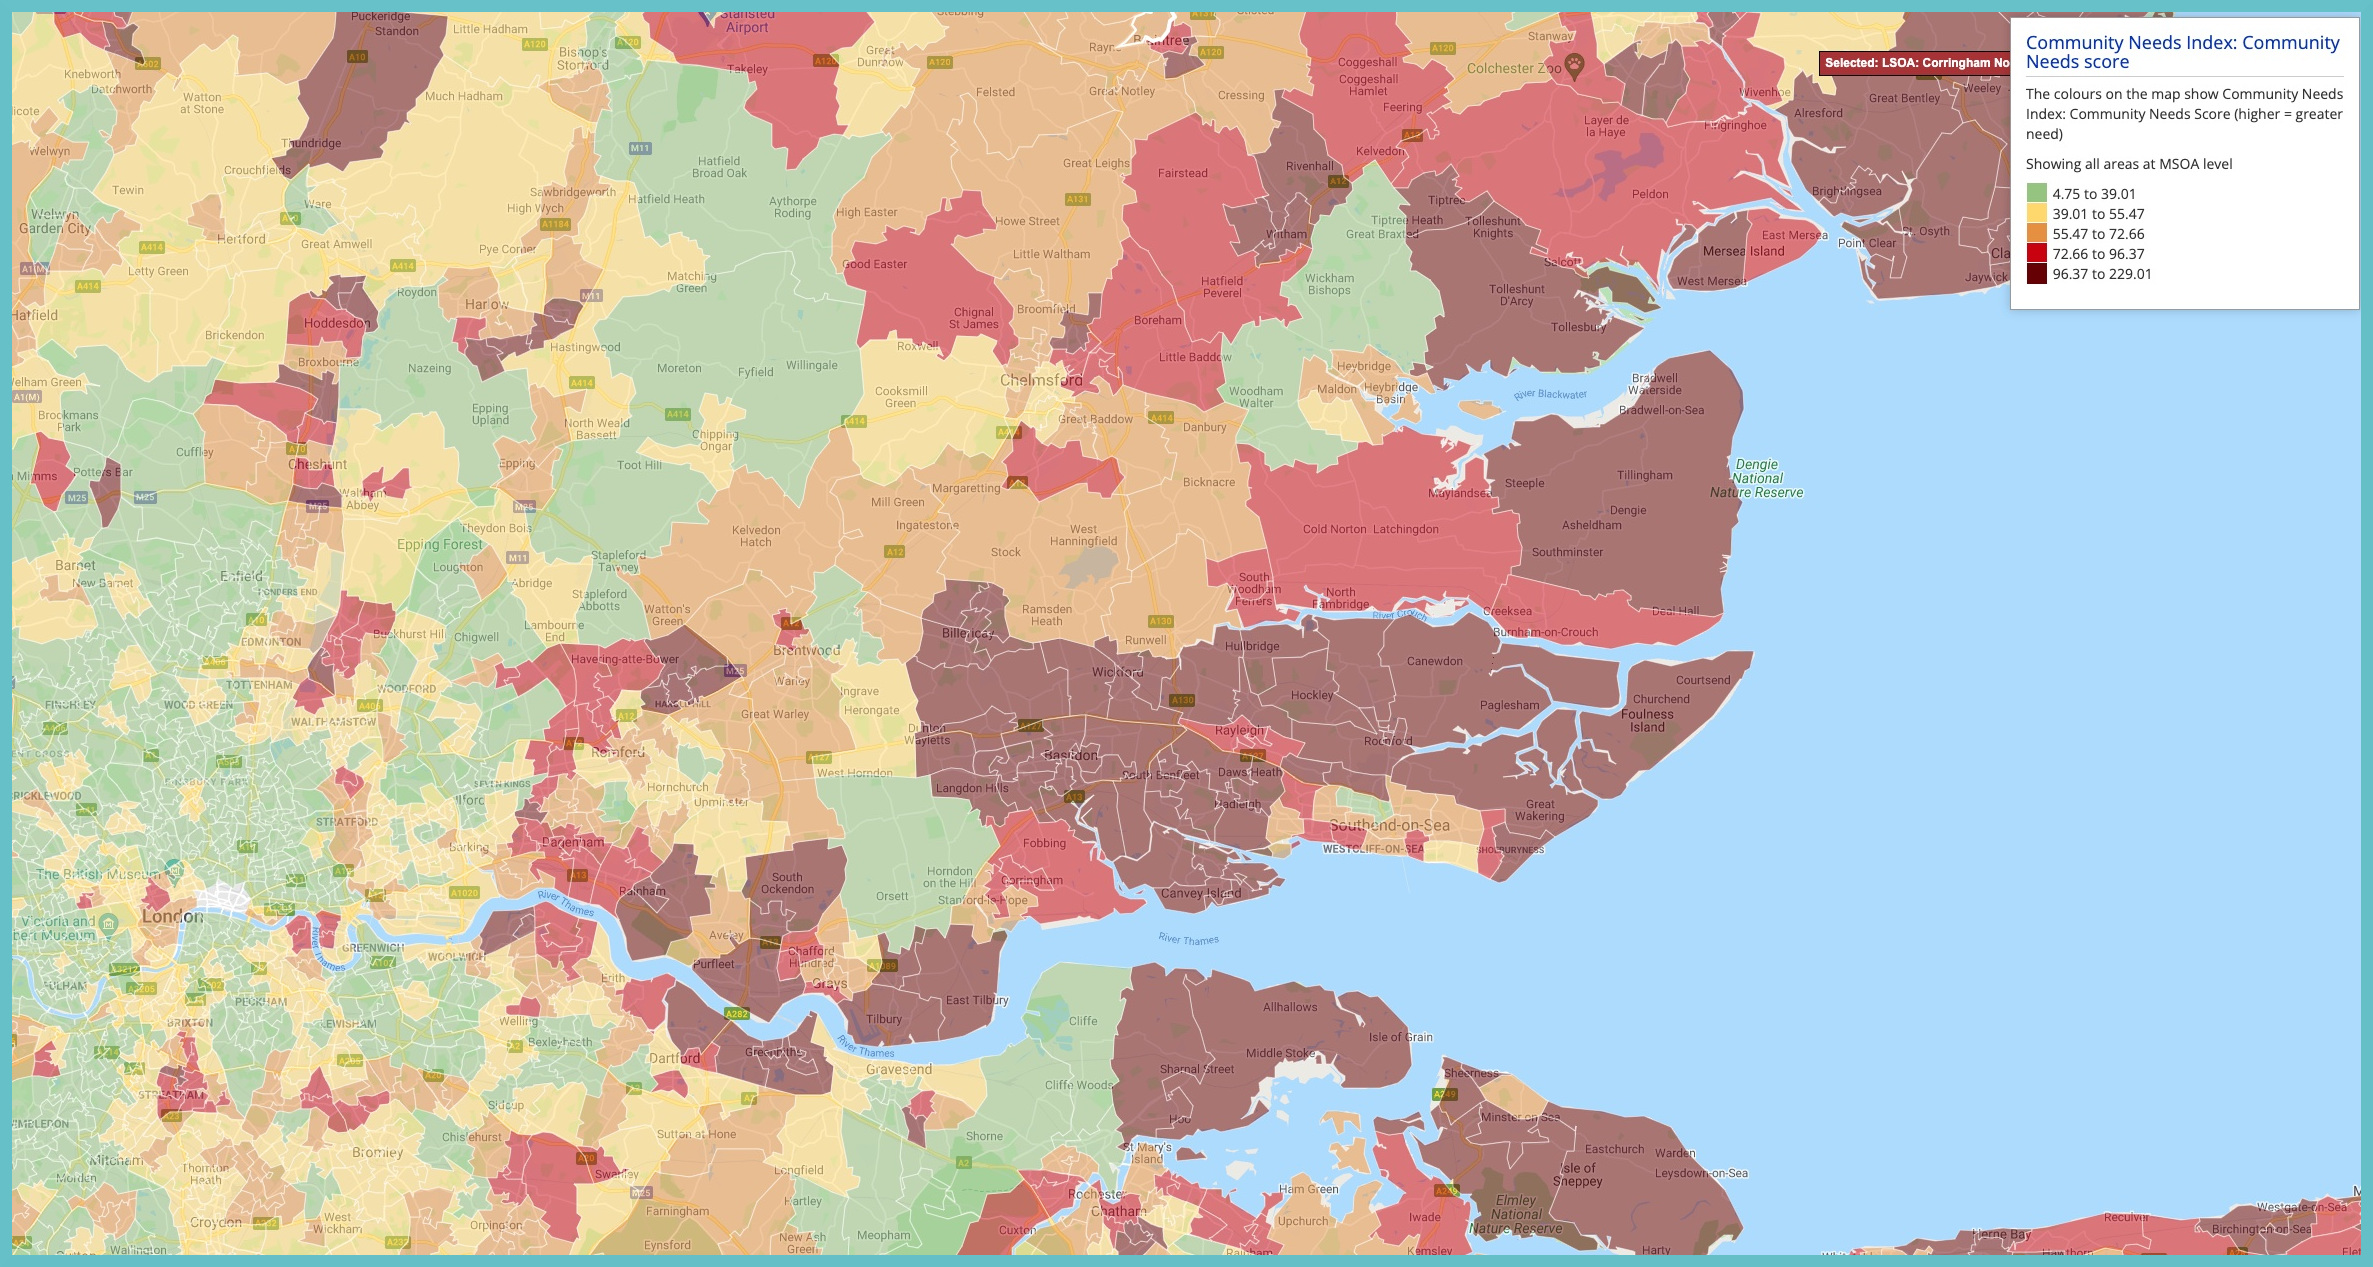 A screenshot of a choropleth map showing the Community Needs Index score at local authority level for Essex and surrounding areas